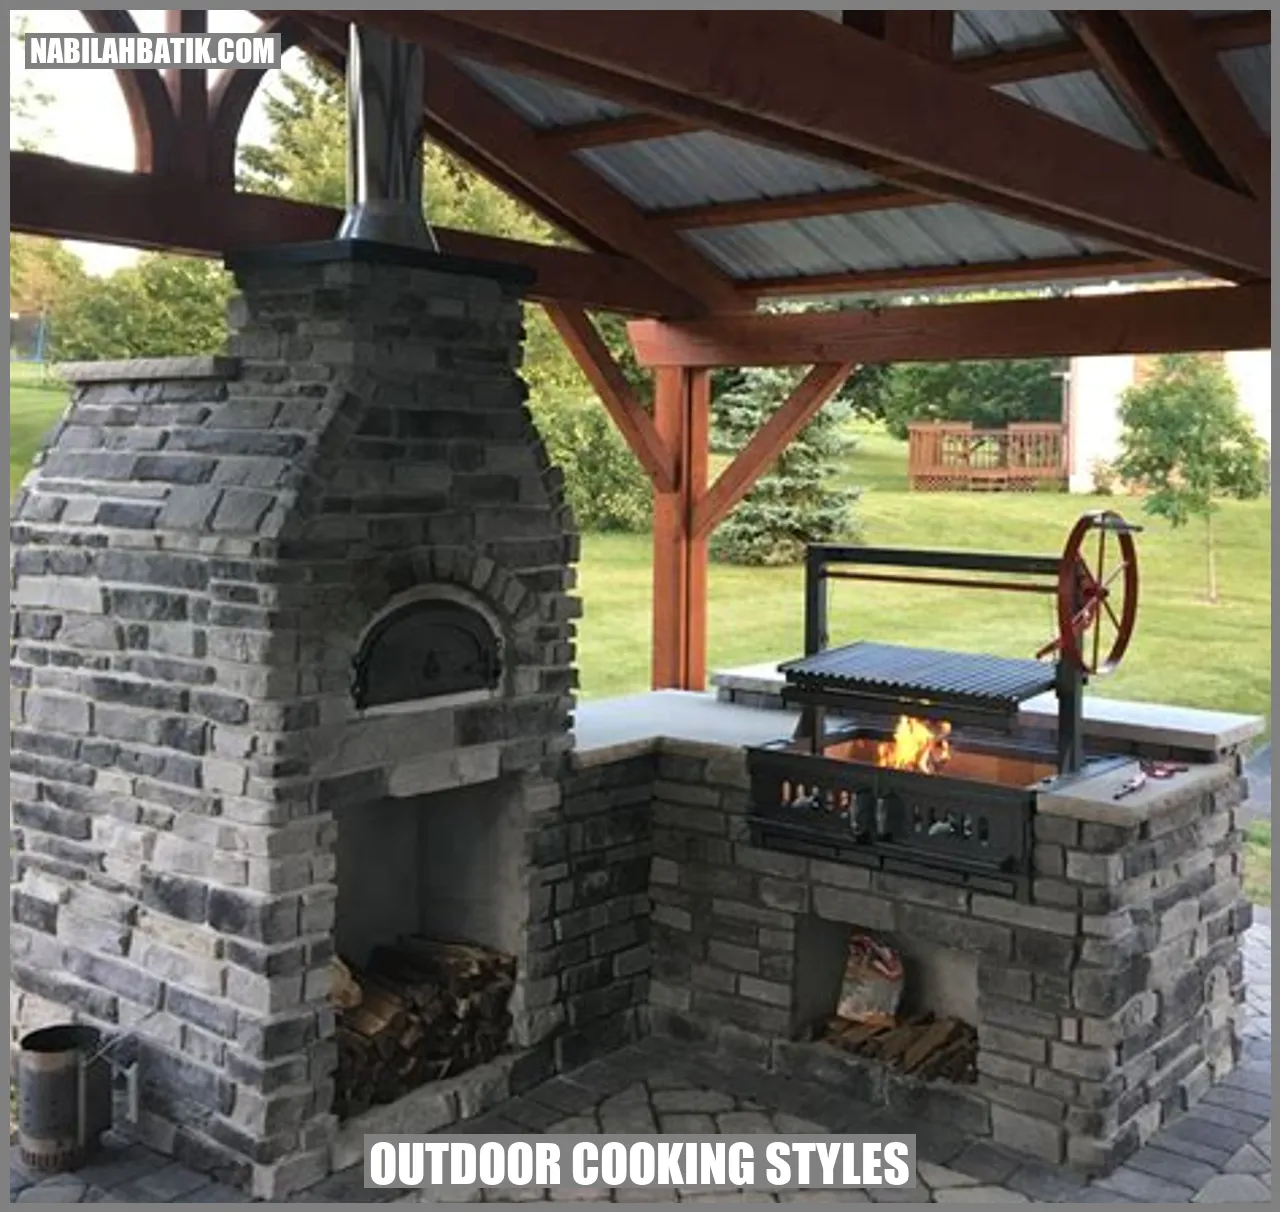 Outdoor Cooking Styles